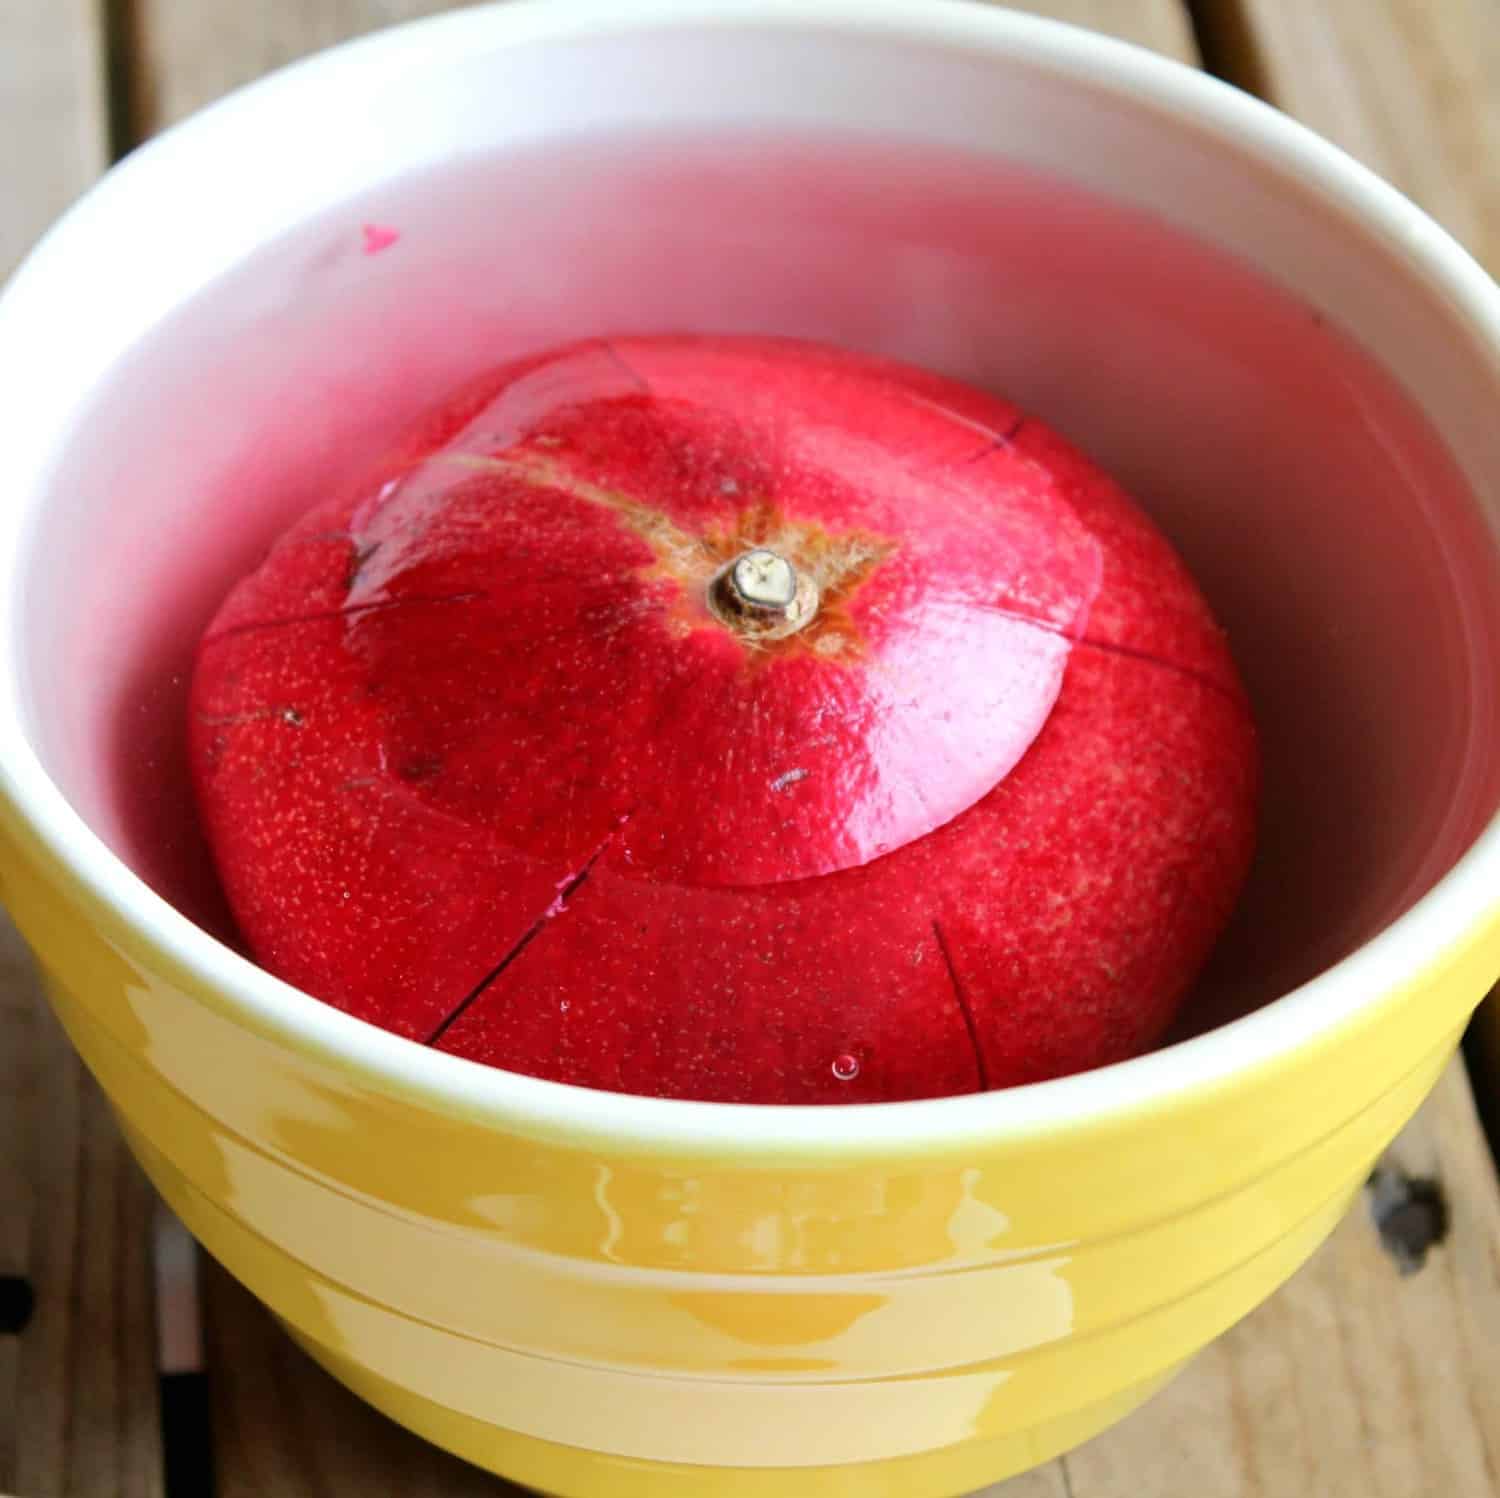 Pomegranate face down in a bowl of water.